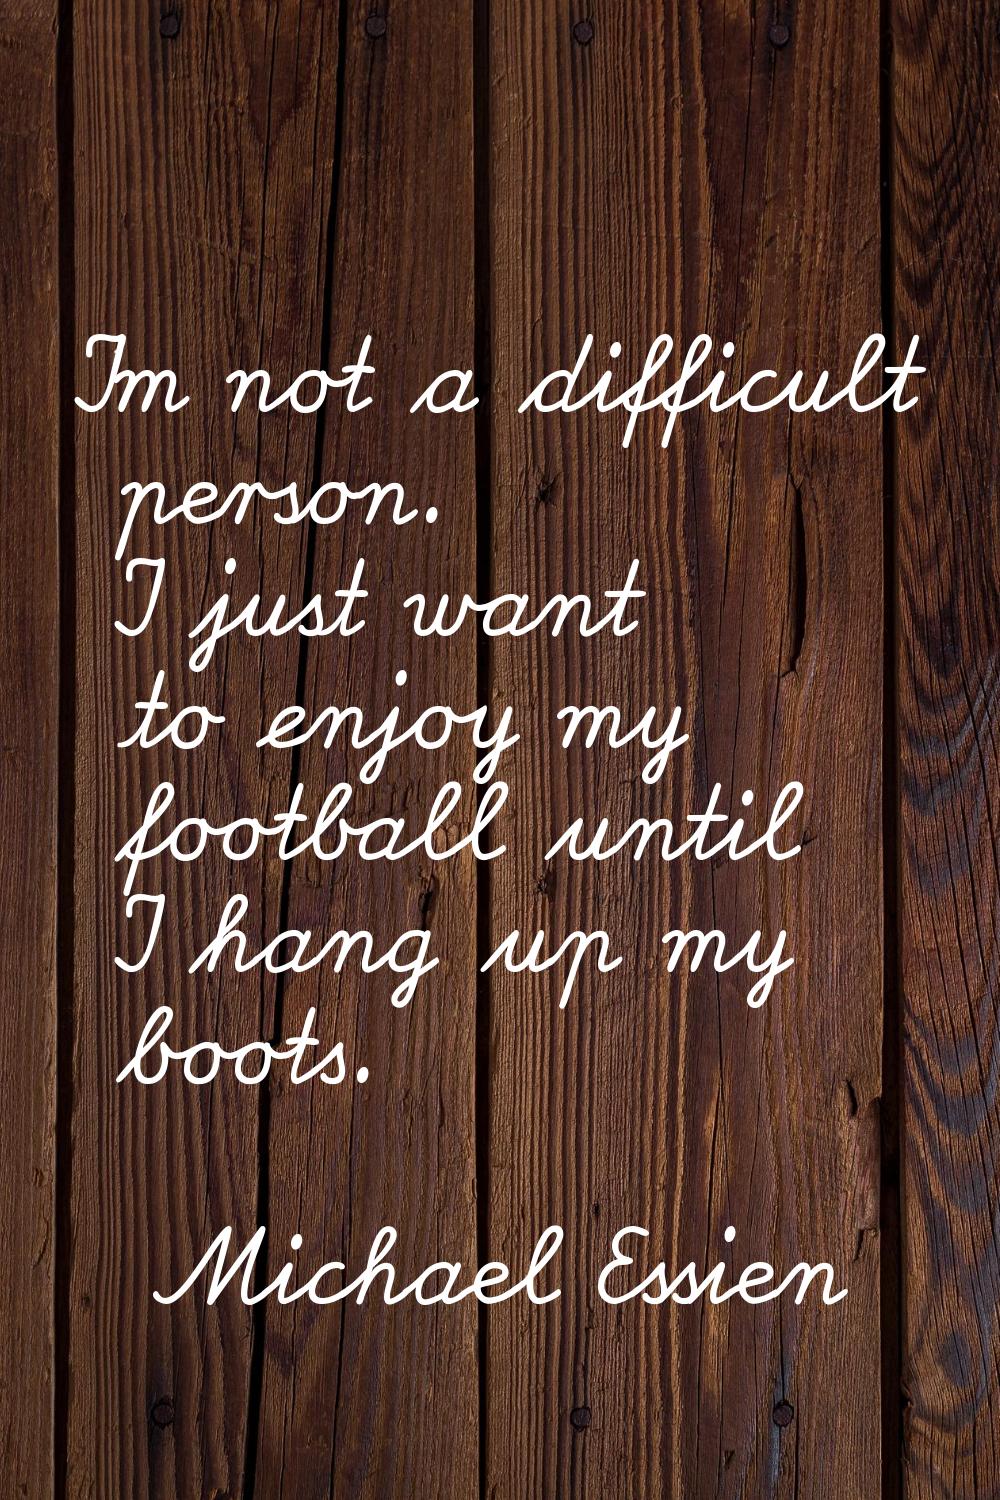 I'm not a difficult person. I just want to enjoy my football until I hang up my boots.